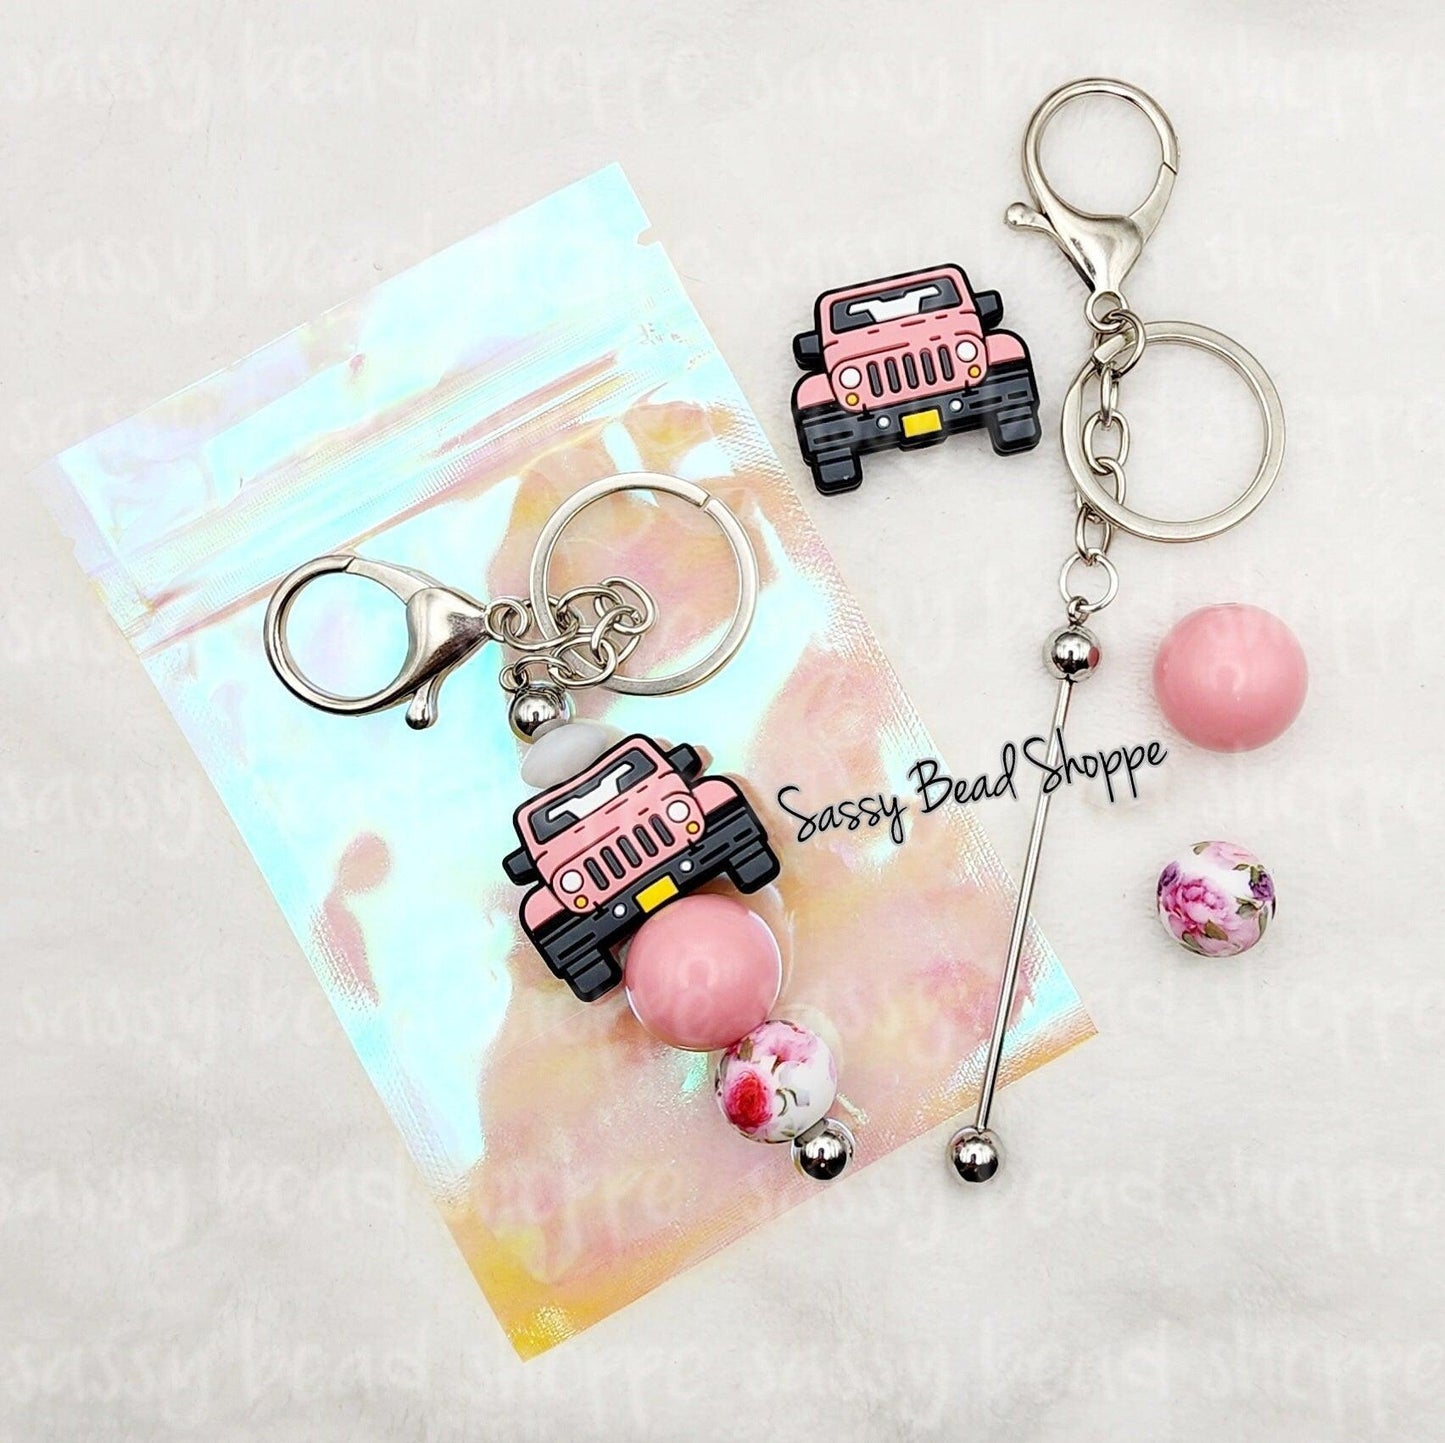 Jeep Girl Keychain Kit, Beadable Key Chain, Pink Jeep Beaded Keychain, Off Road Riding, Focal Beads, Bubblegum Beads, Silicone Beads